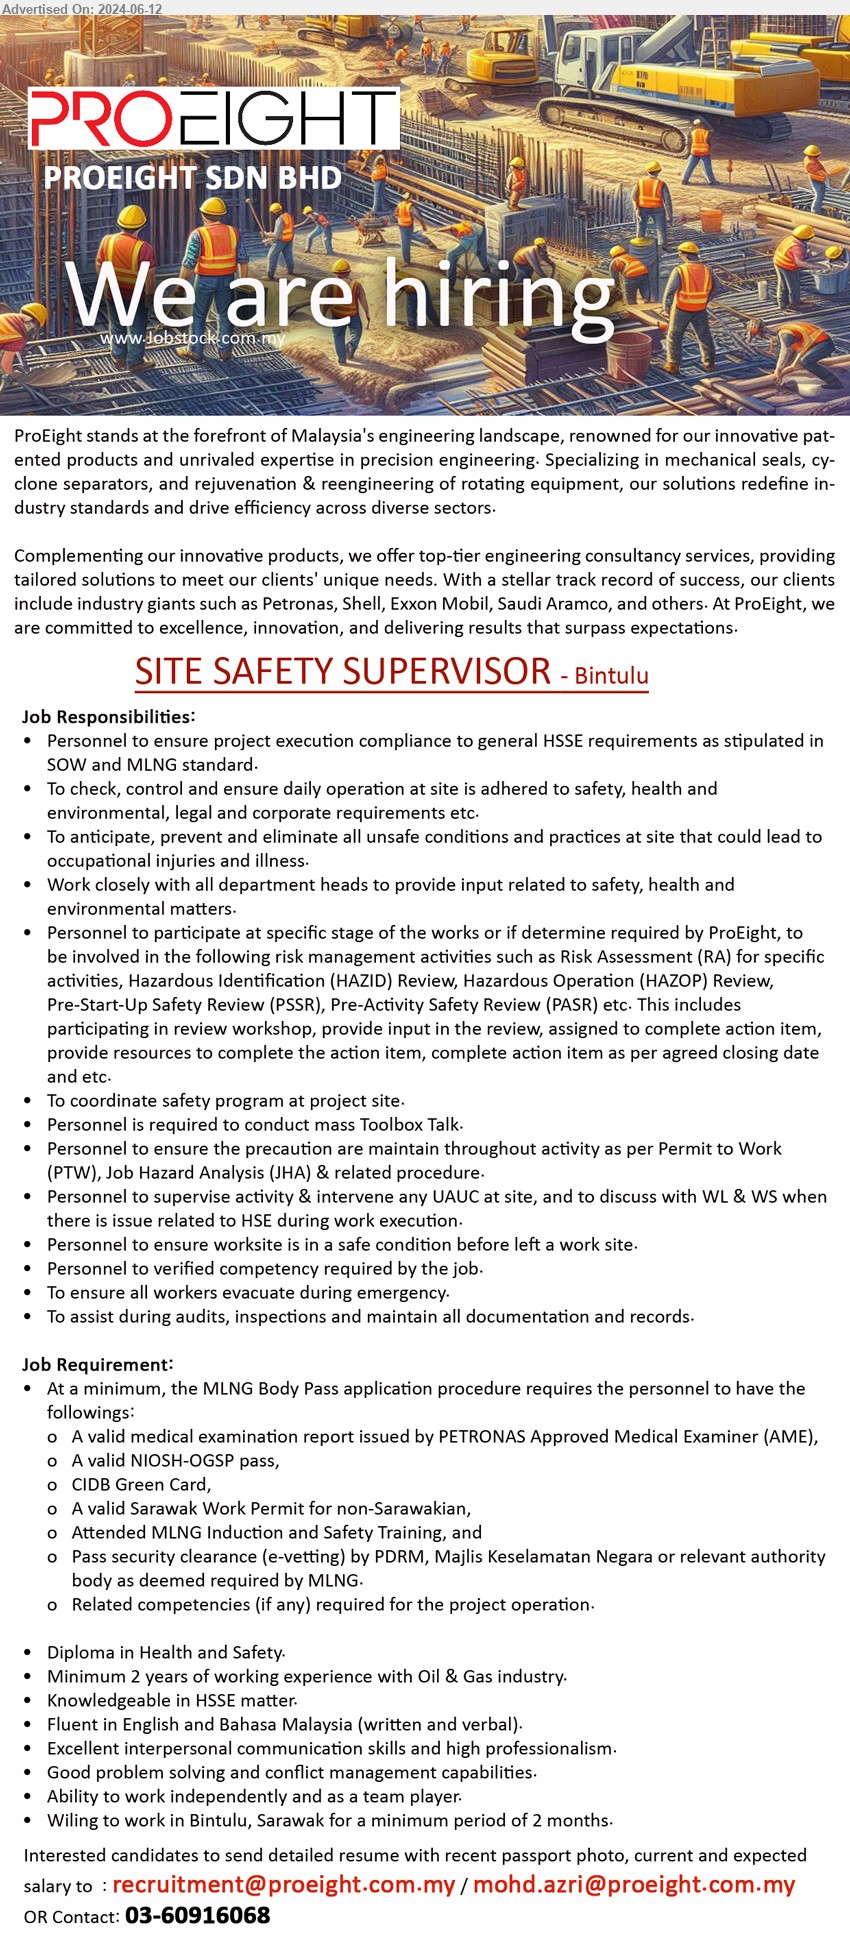 PROEIGHT SDN BHD - SITE SAFETY SUPERVISOR (Bintulu), Diploma in Health and Safety, Knowledgeable in HSSE matter, Minimum 2 years of working experience with Oil & Gas industry,...
Contact: 03-60916068 / Email resume to ...
